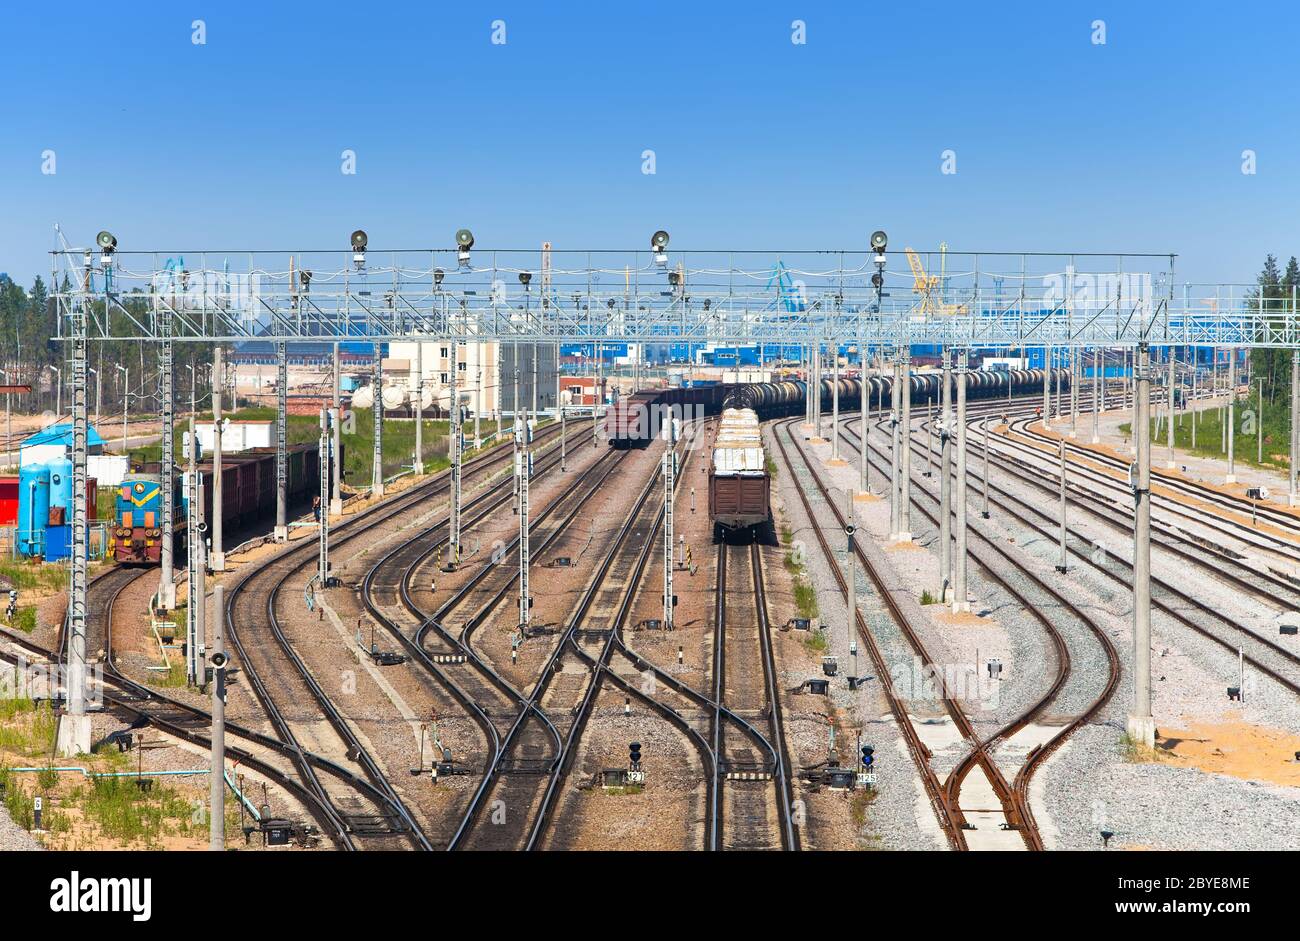 Railway sorting station - rails and trains Stock Photo